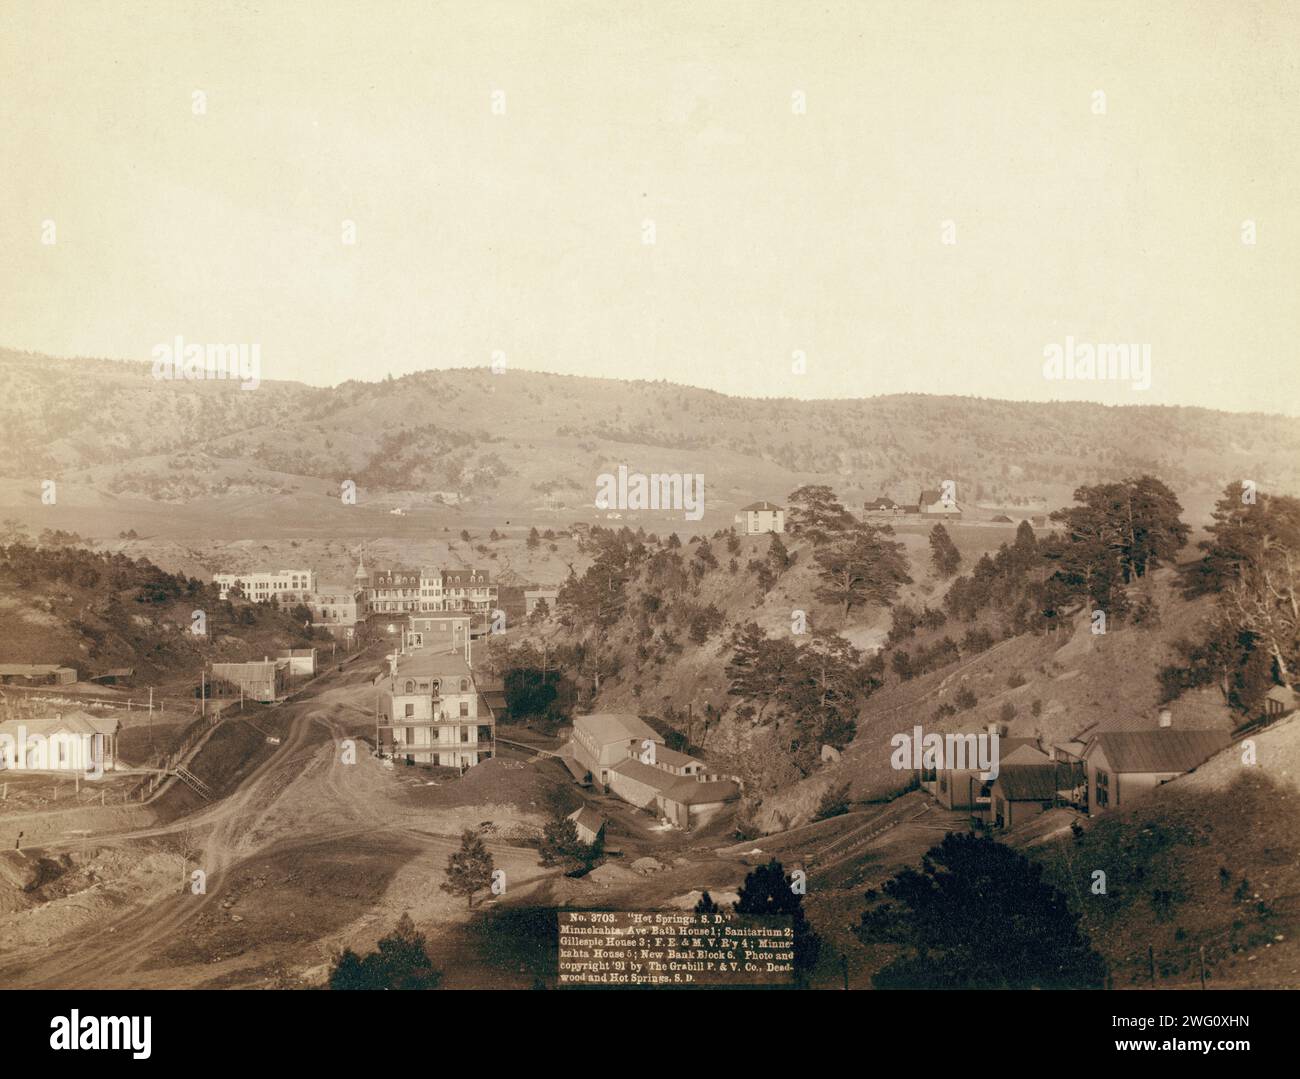 Hot Springs, S.D. Minnekahta, Ave. Bath house 1; Sanitarium 2; Gillespie House 3; F.E. and M.V. R'y. 4; Minnekahta House 5; New bank block 6 []. Bird's-eye view of small town; hills in background. Stock Photo